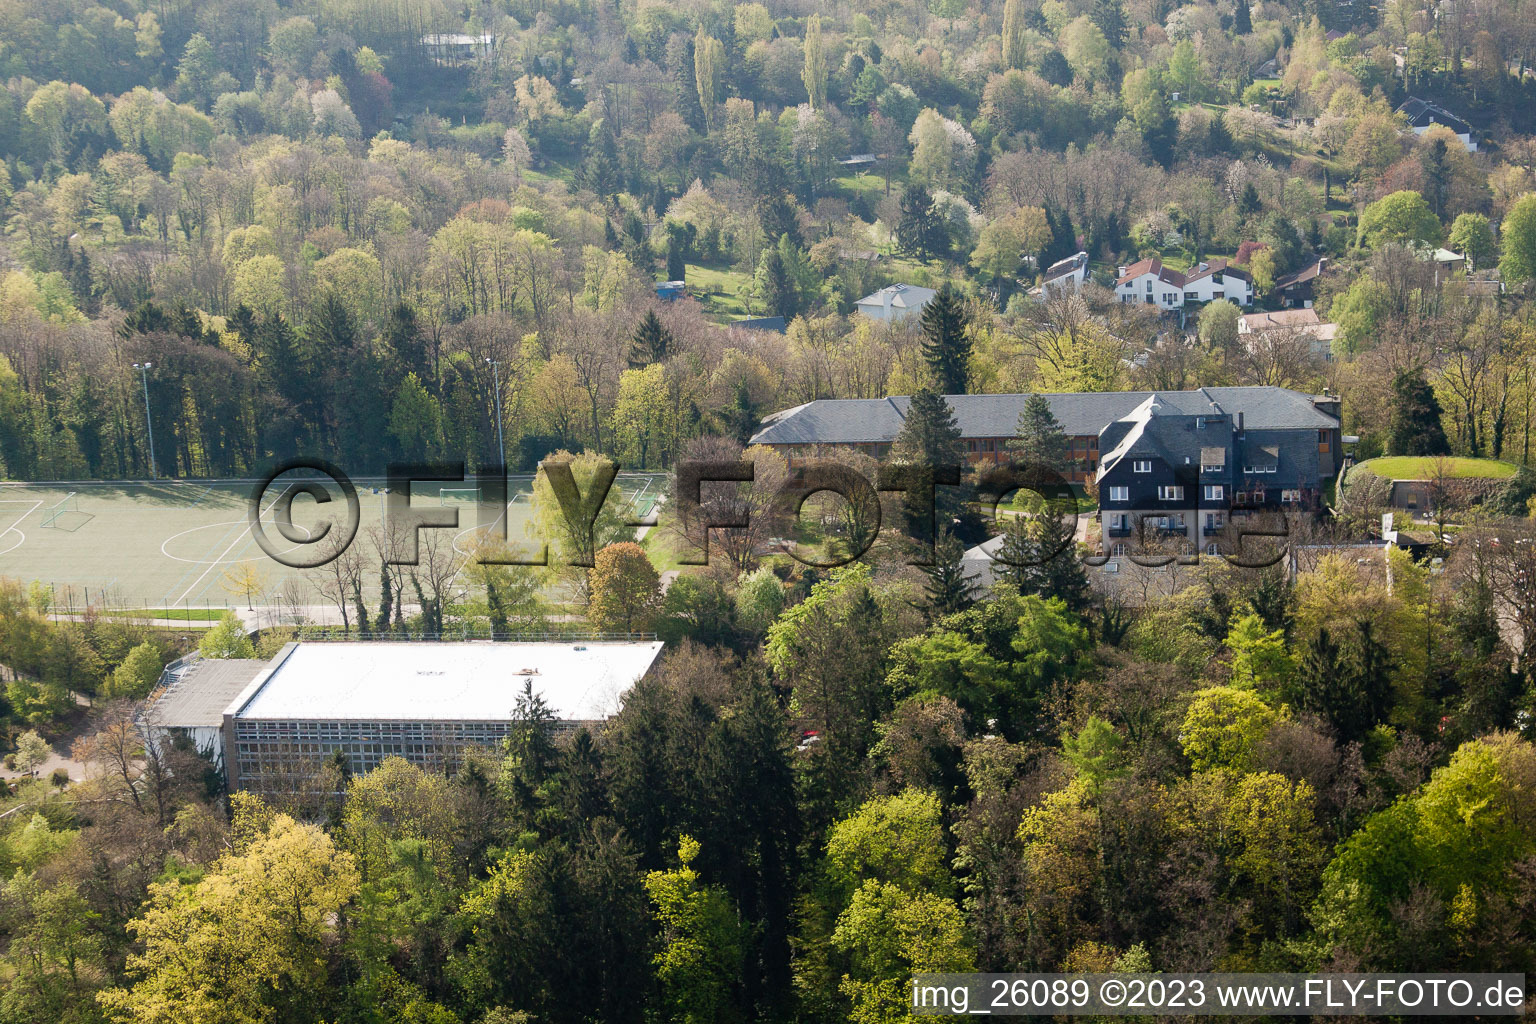 Schöneck sports school behind the Turmberg in the district Durlach in Karlsruhe in the state Baden-Wuerttemberg, Germany from above